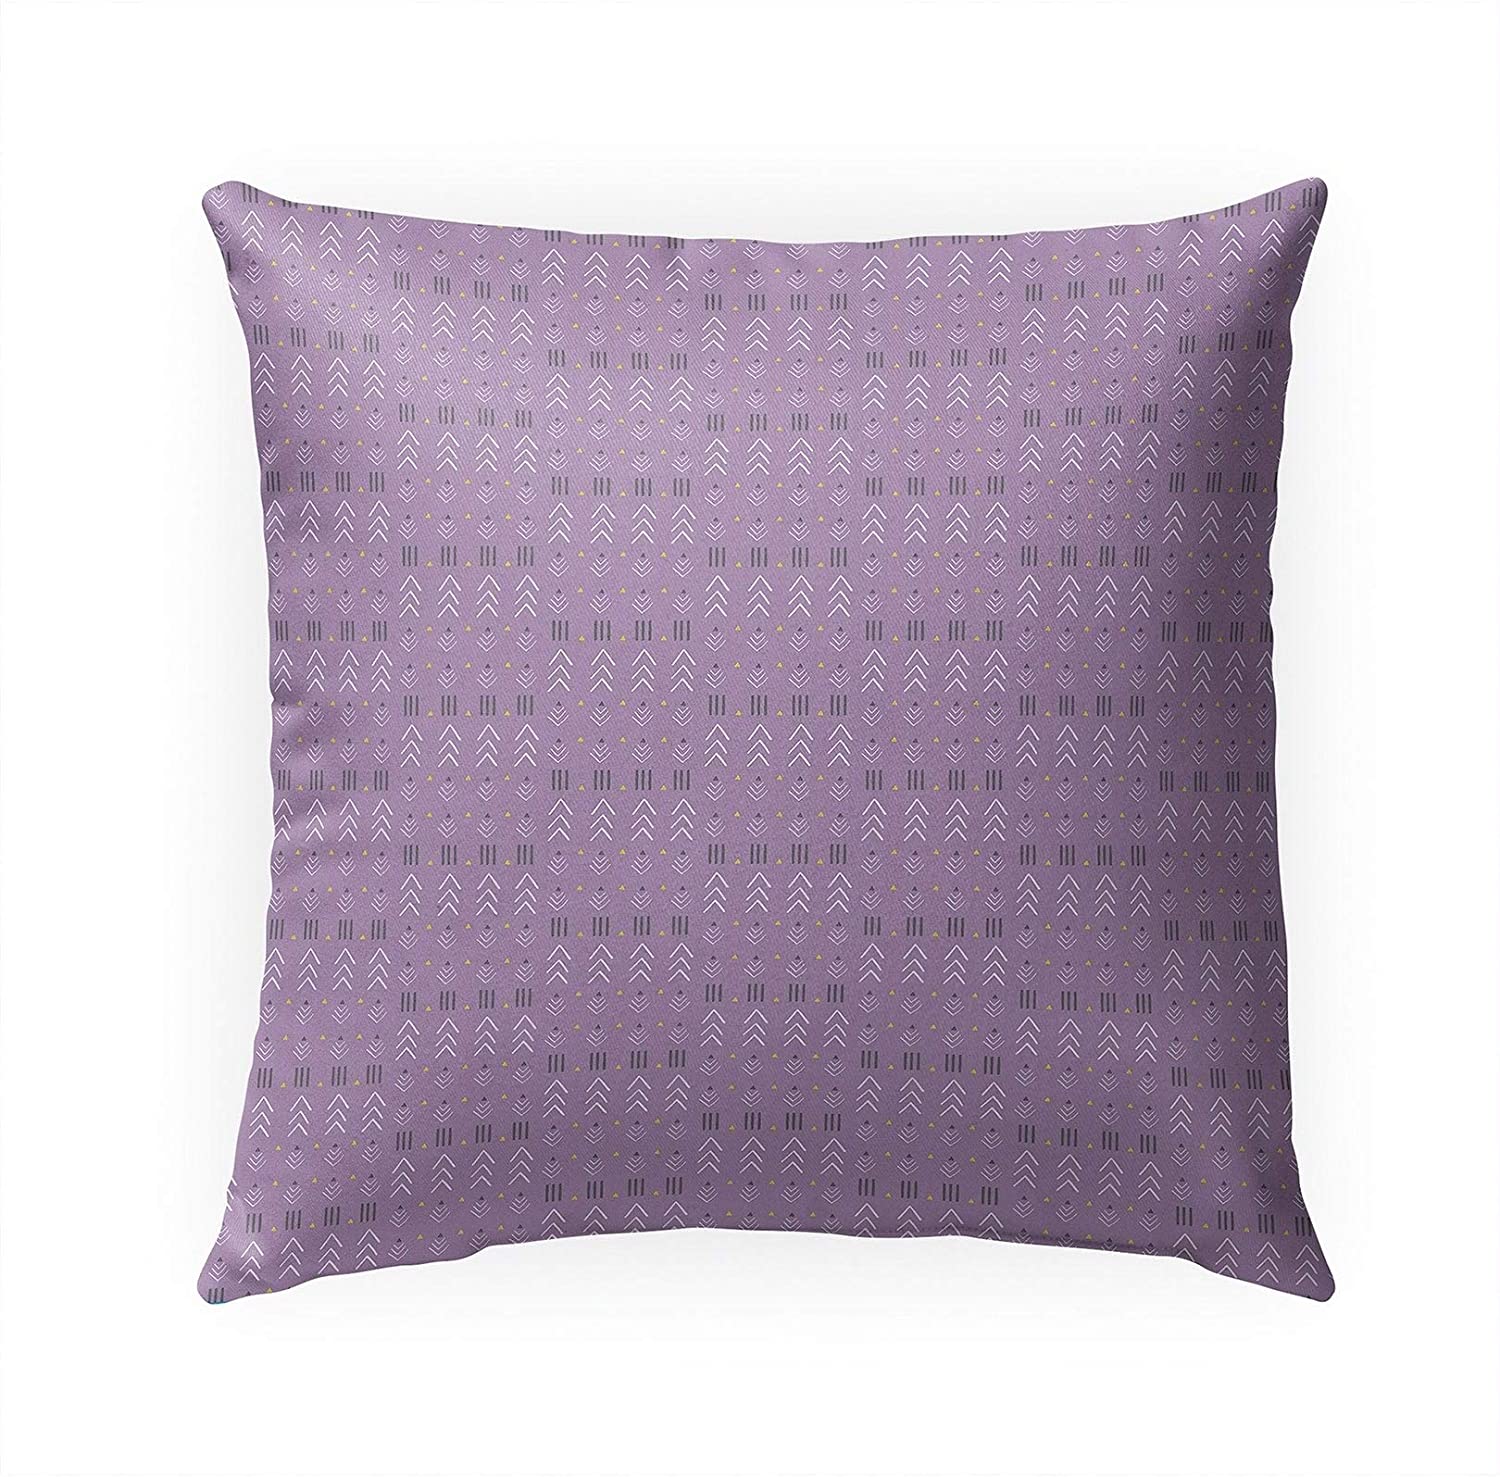 MISC Boho Lavender Indoor|Outdoor Pillow by Chi Hey Lee 18x18 Purple Geometric Bohemian Eclectic Polyester Removable Cover